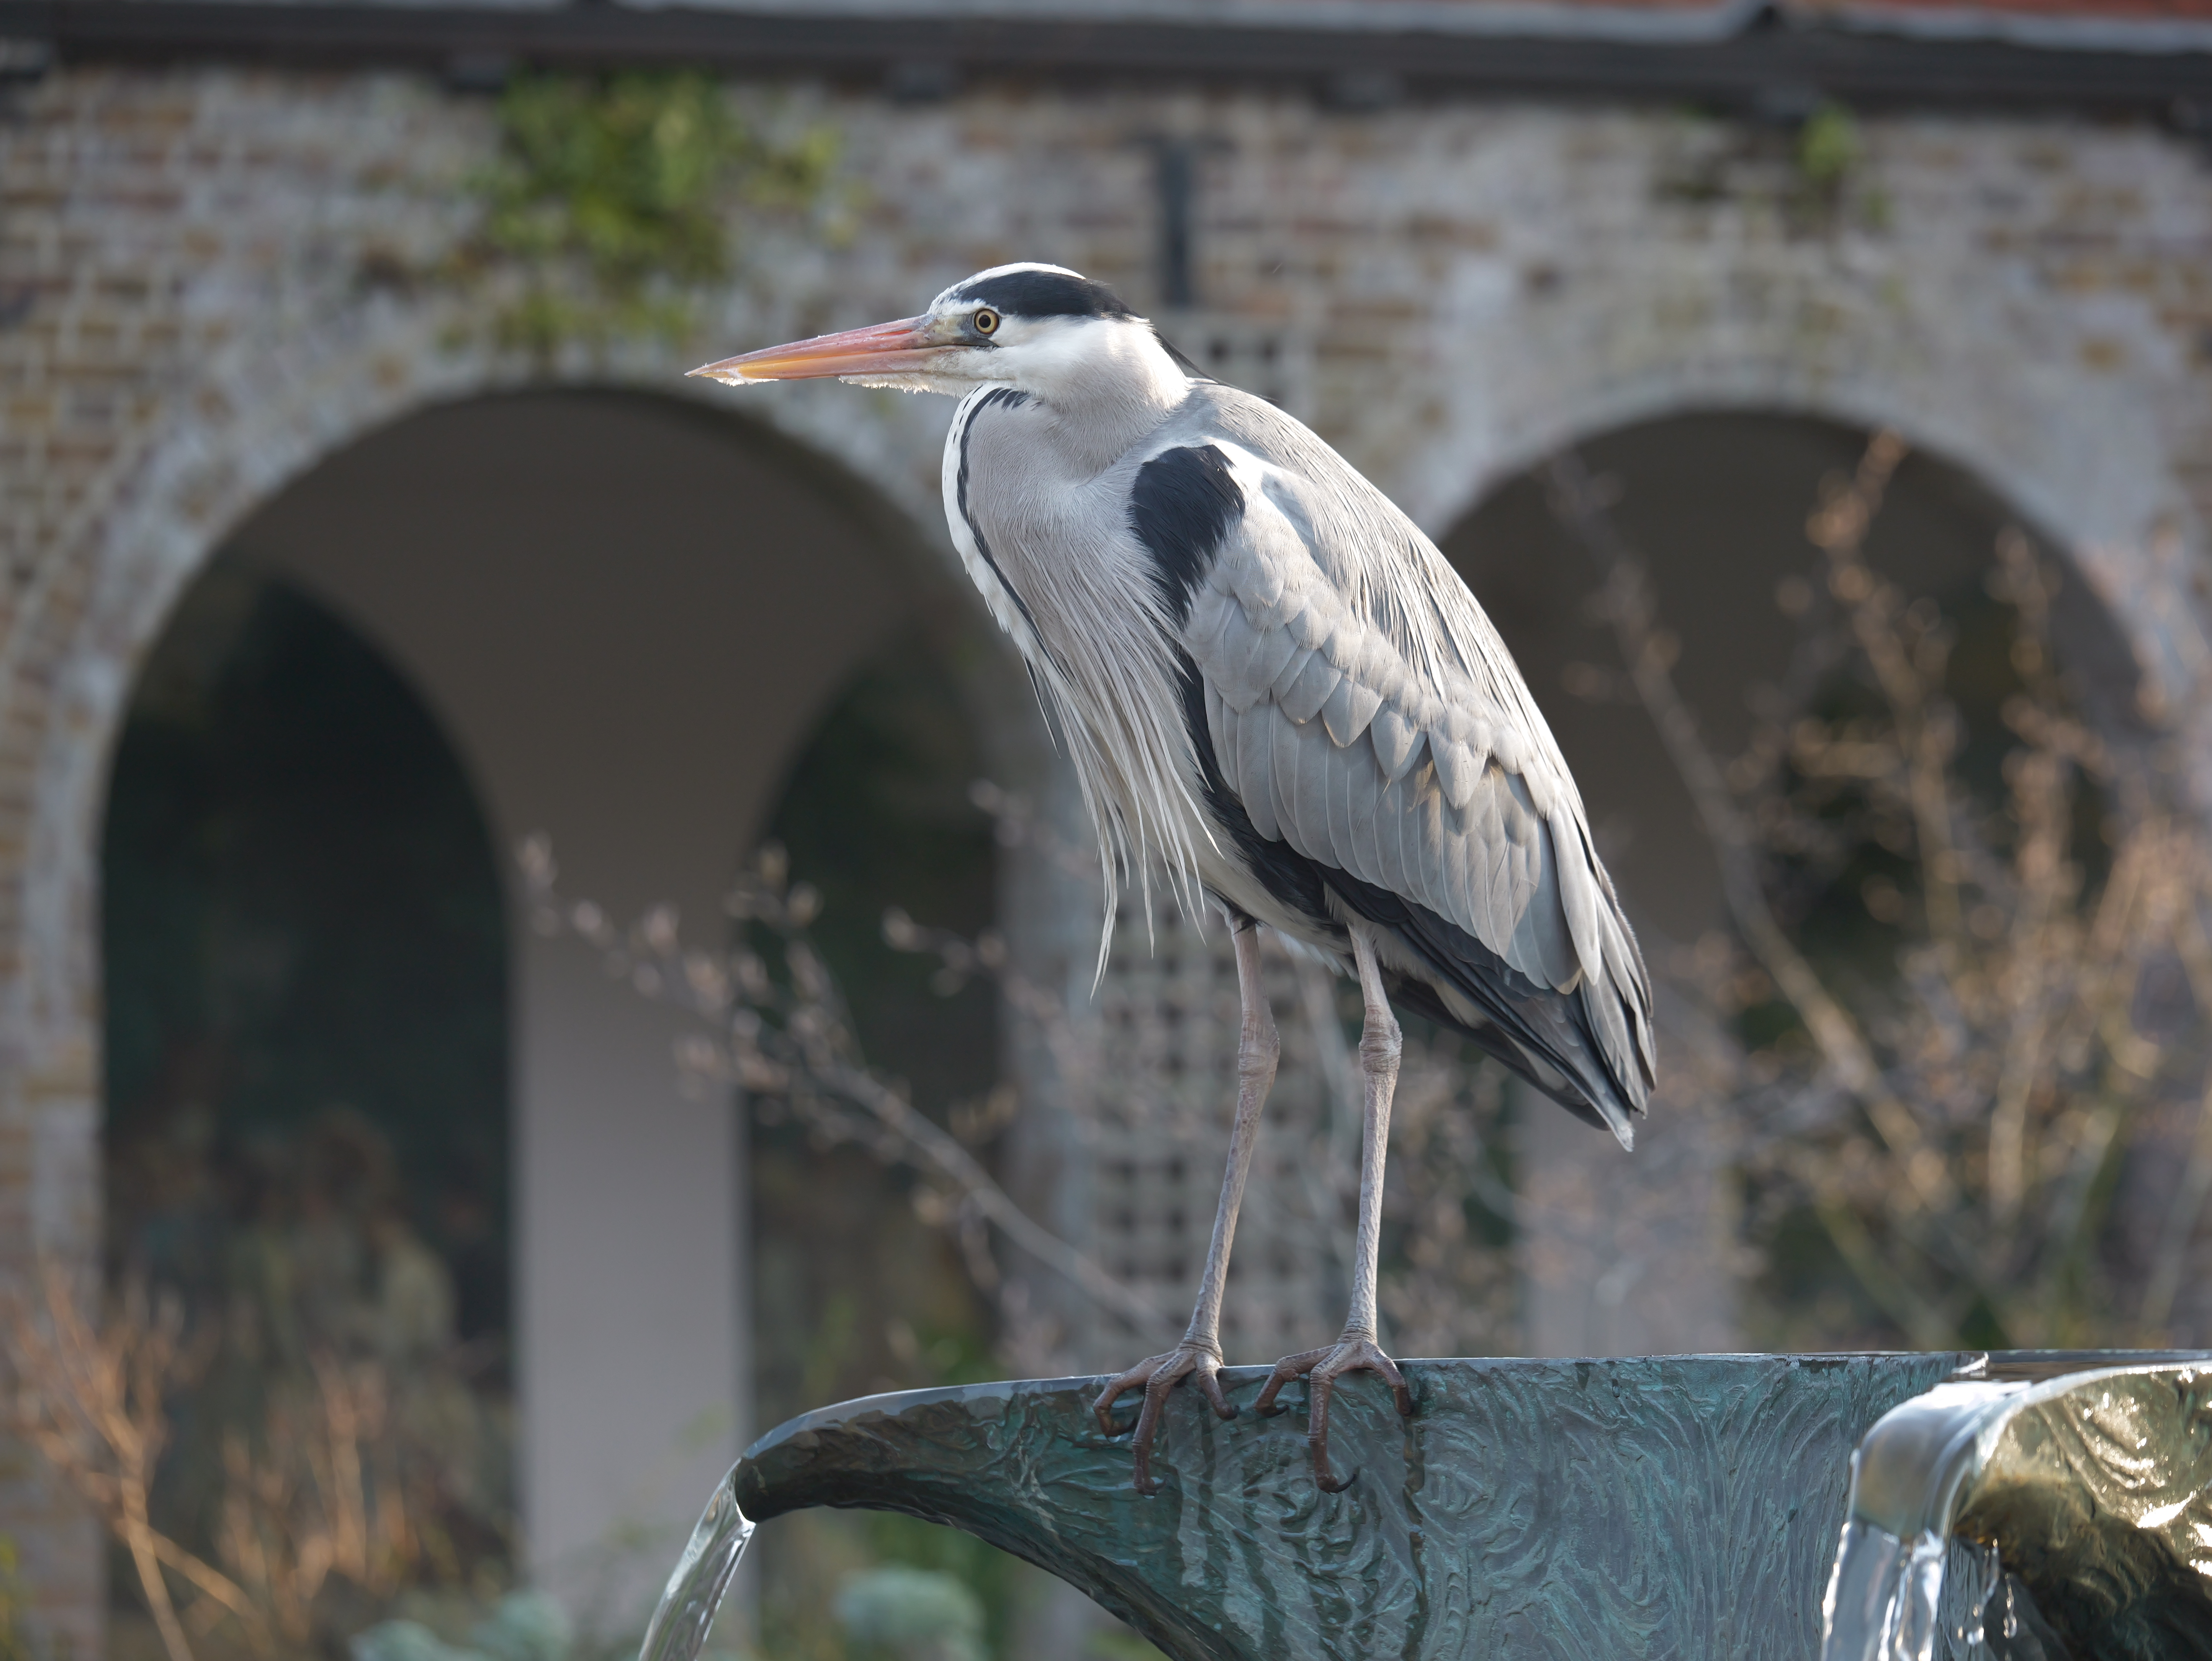 Image of a heron